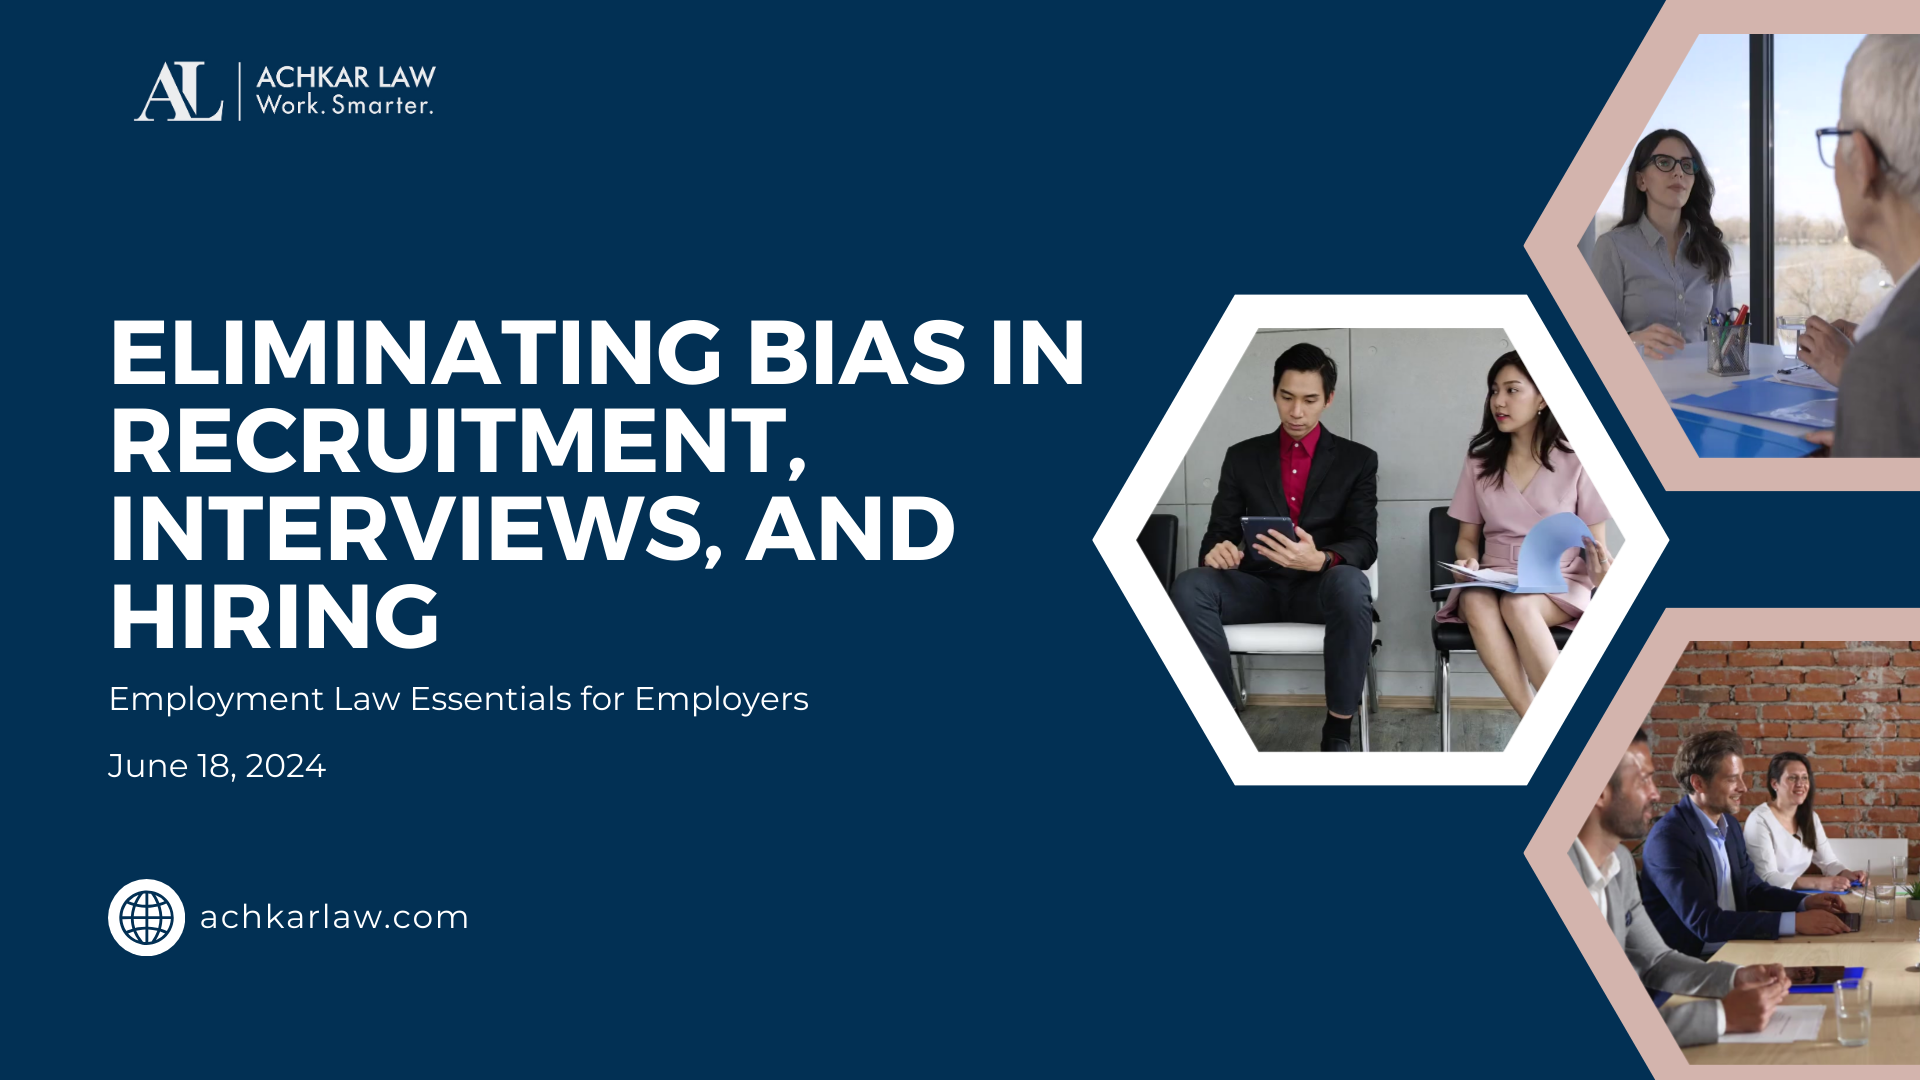 Eliminate Bias in Recruitment, Interviews, and Hiring